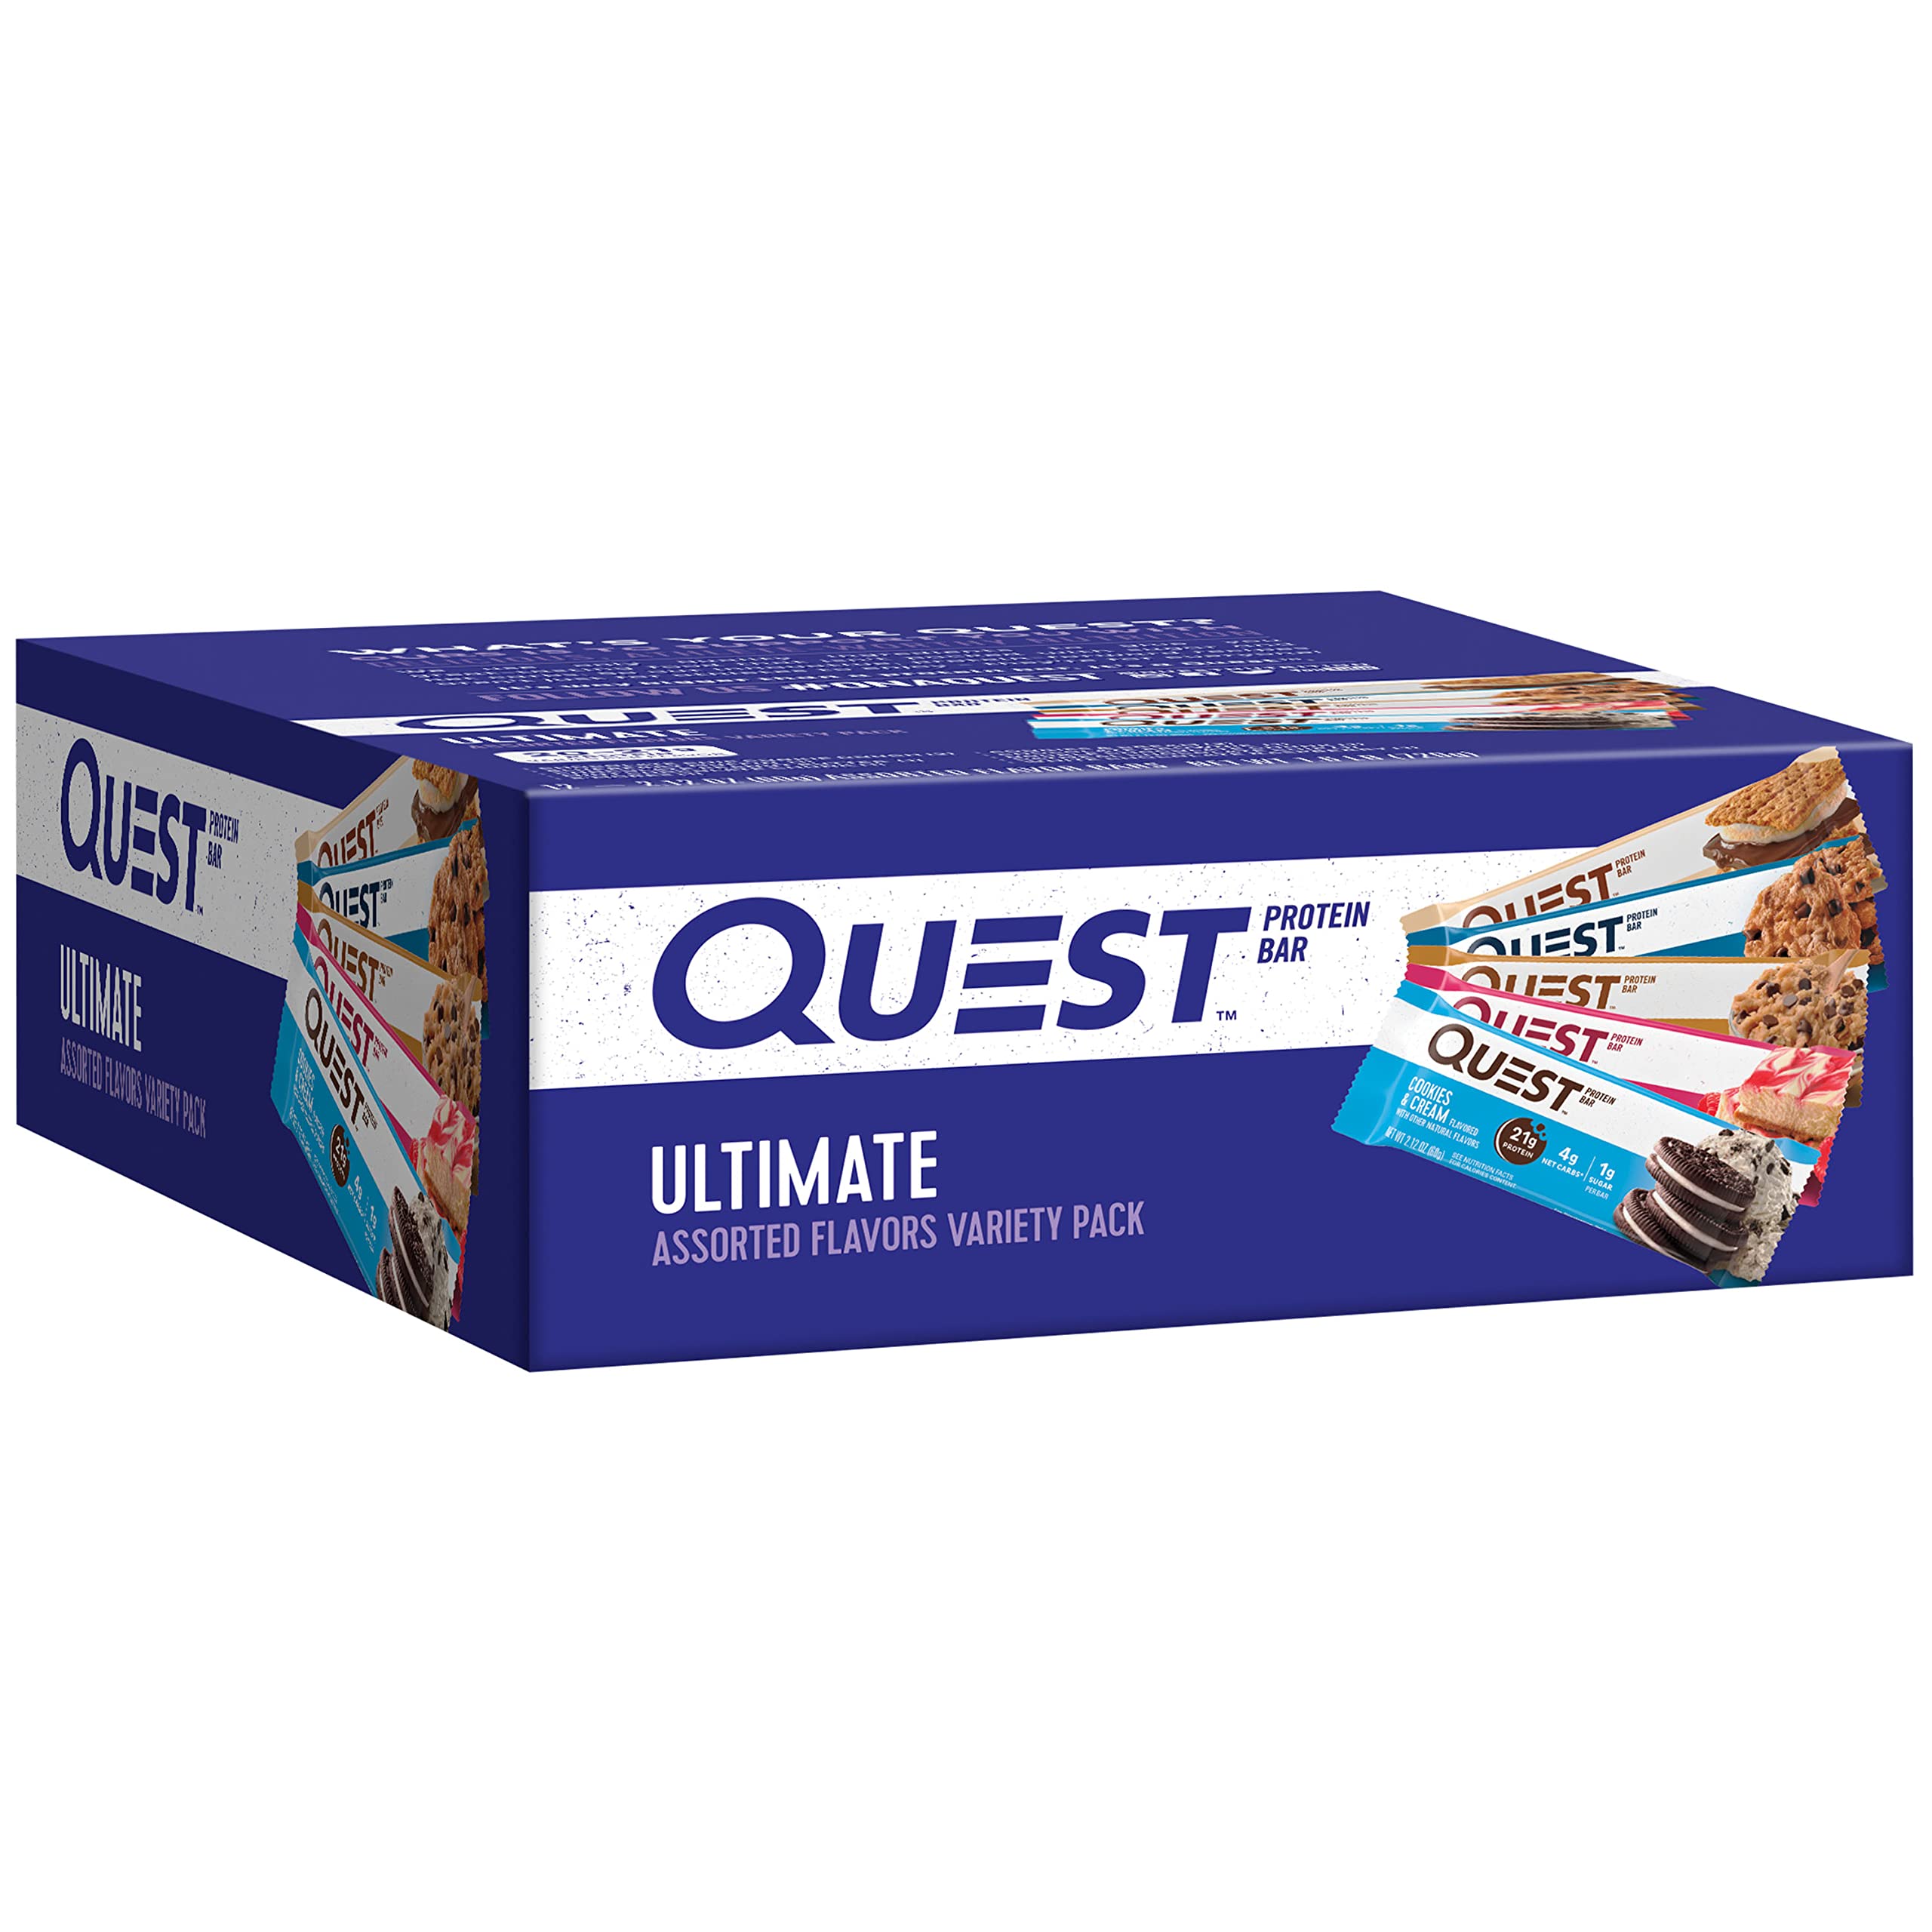 Quest Nutrition Ultimate Variety Pack Protein Bars, High Protein, Low Carb, Gluten Free, Keto Friendly, 12 Count